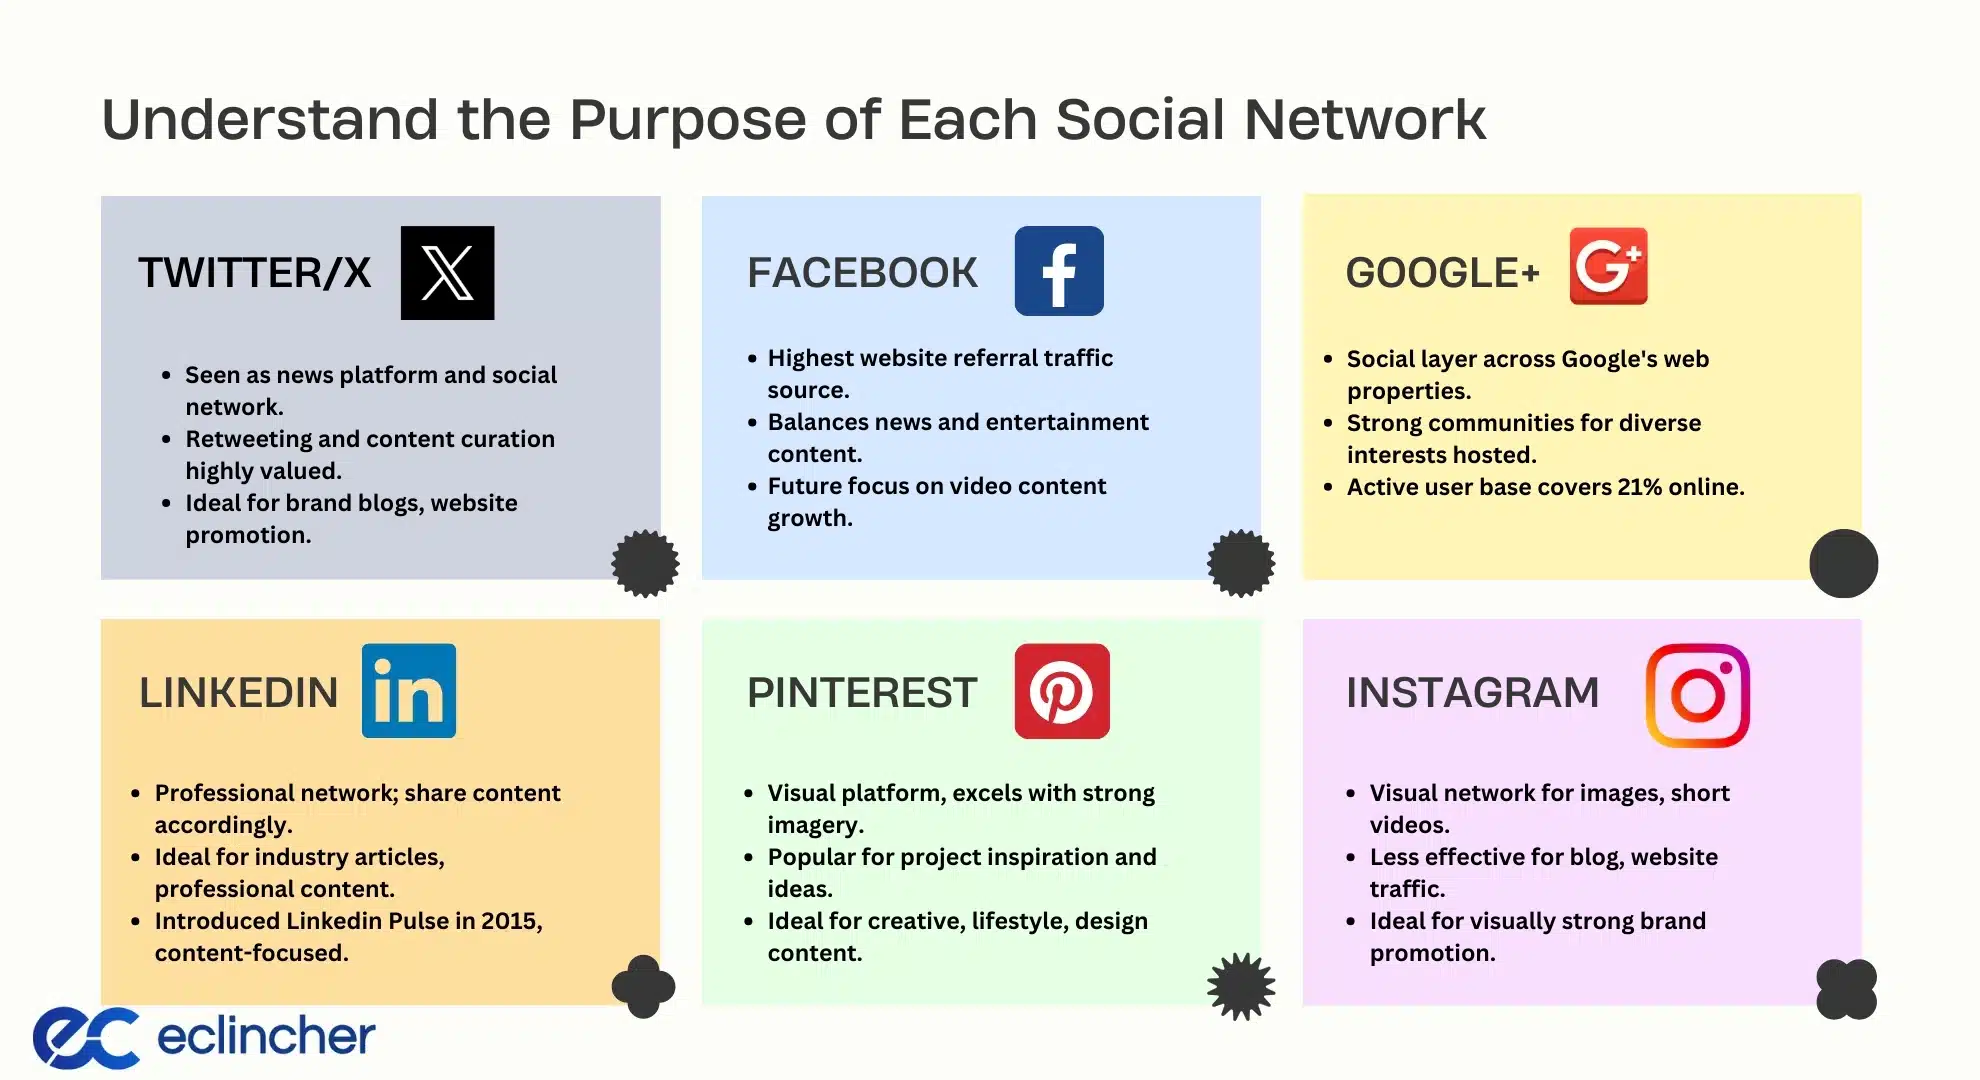 Understand the Purpose of Each Social Network